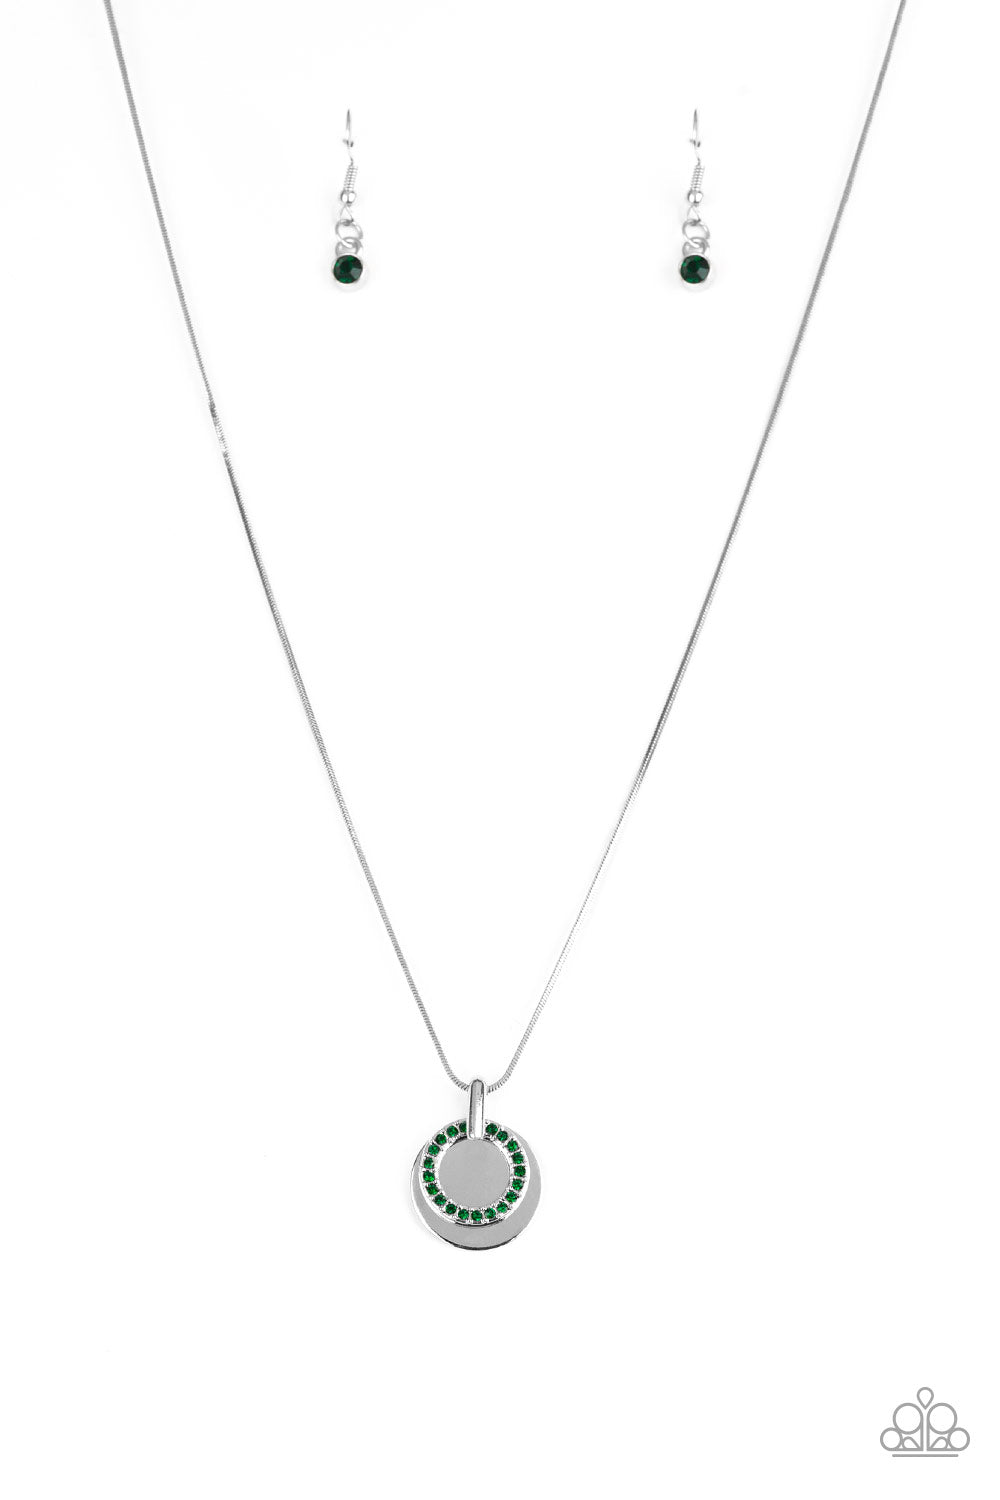 Front and CENTERED - Green Necklace - Paparazzi Accessories